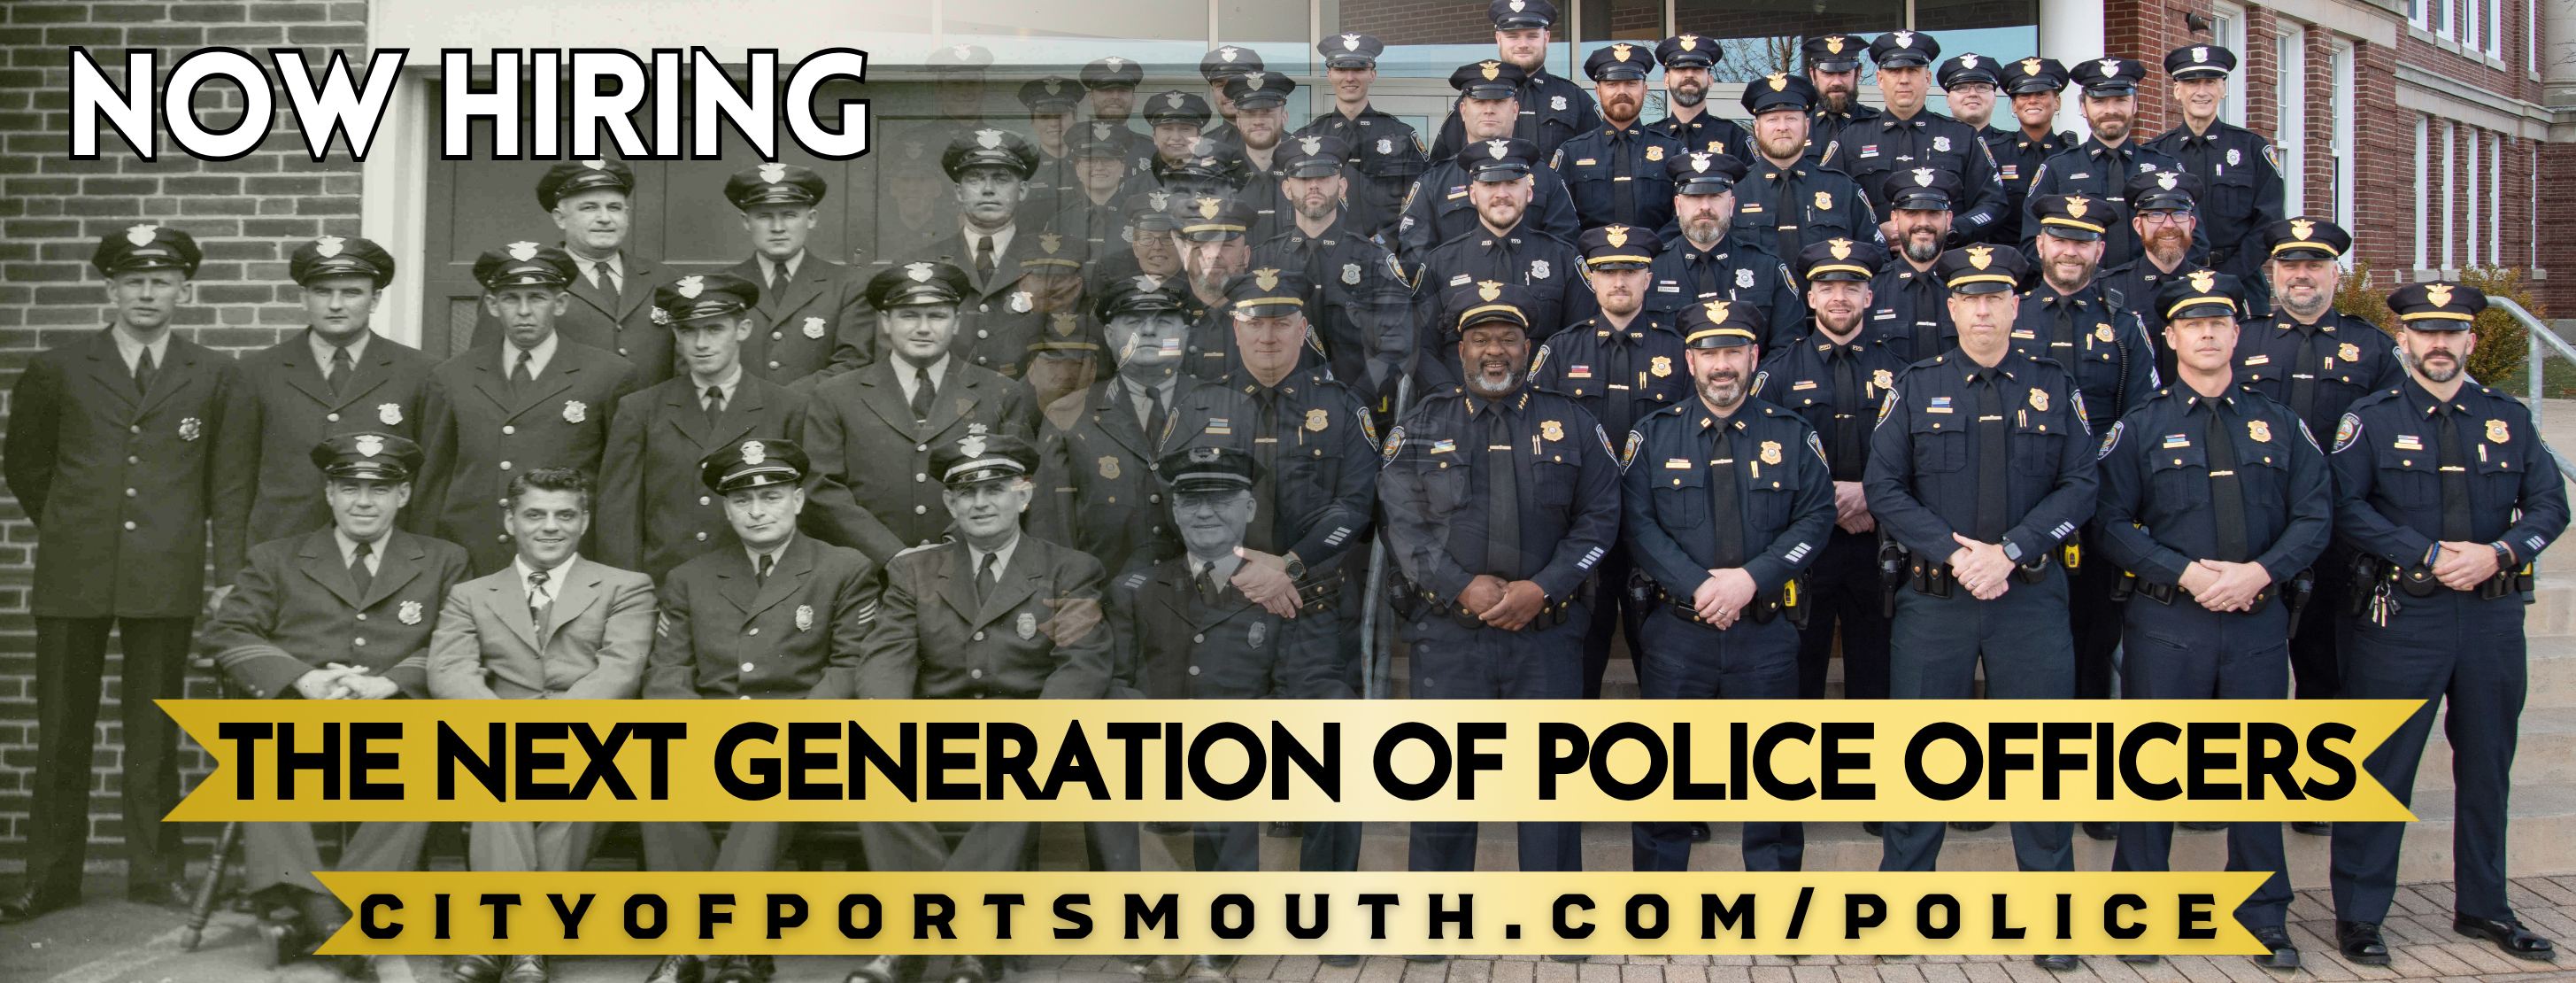 Now Hiring The Next Generation of Law Enforcement